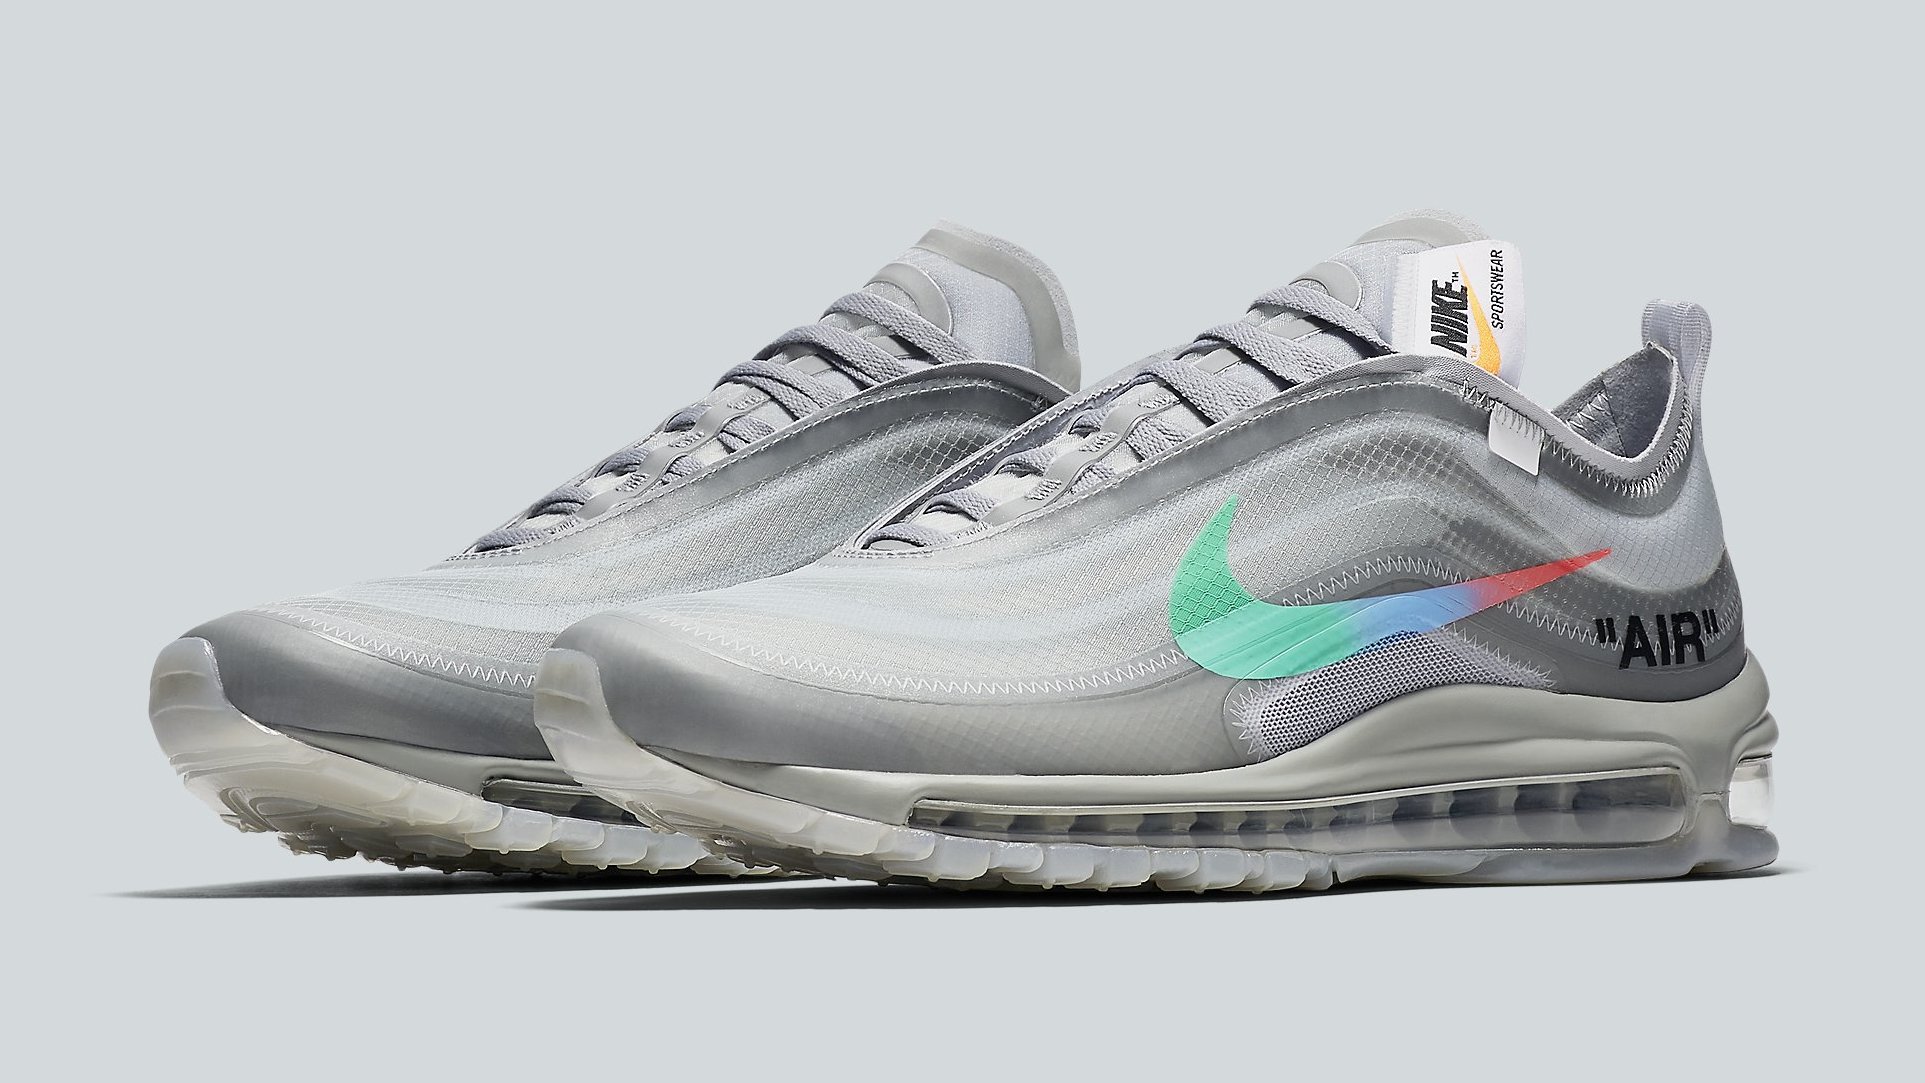 New Release Information for the 'Menta' Off-White x Air Max 97 